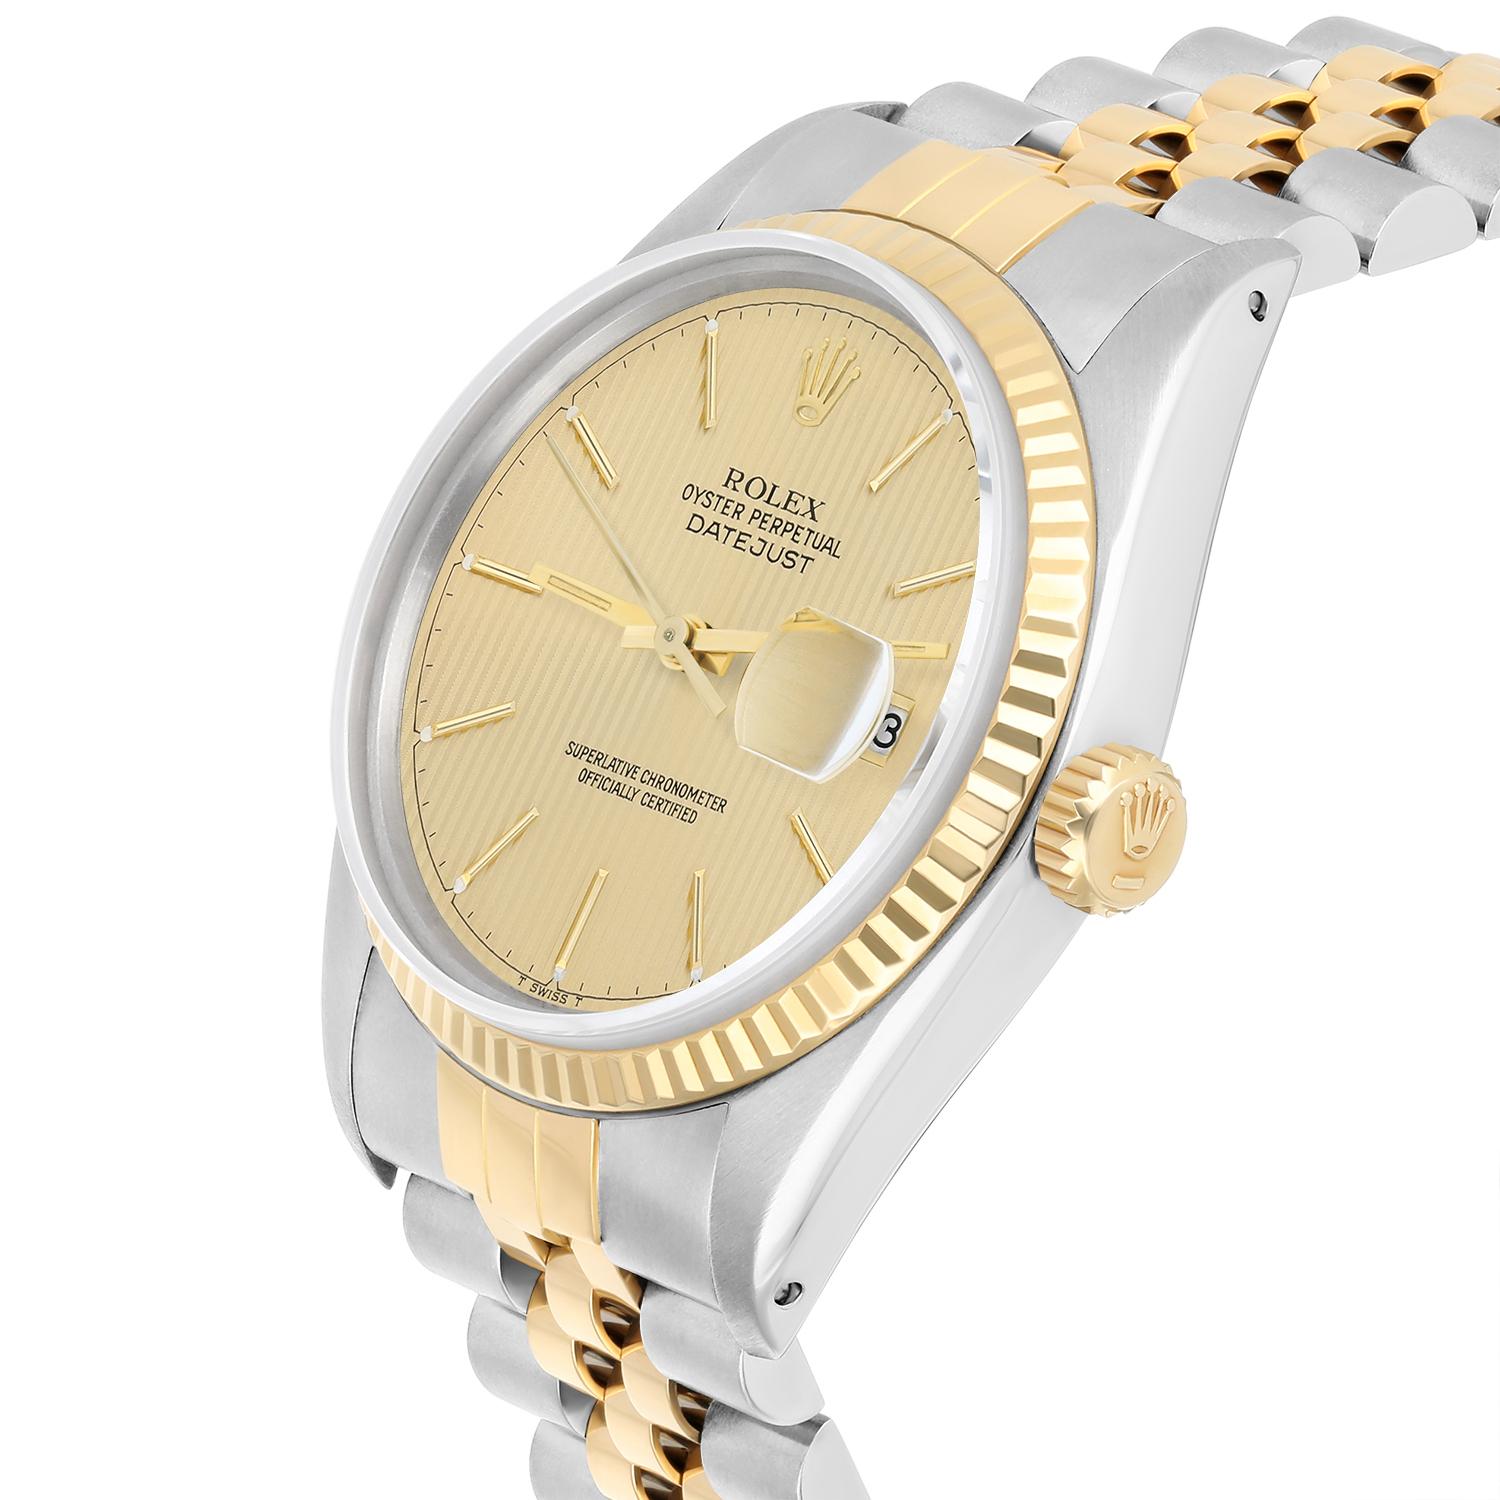 Rolex Datejust 36mm Two Tone Champagne Dial Jubilee 16013 Circa 1988 Papers en vente 1